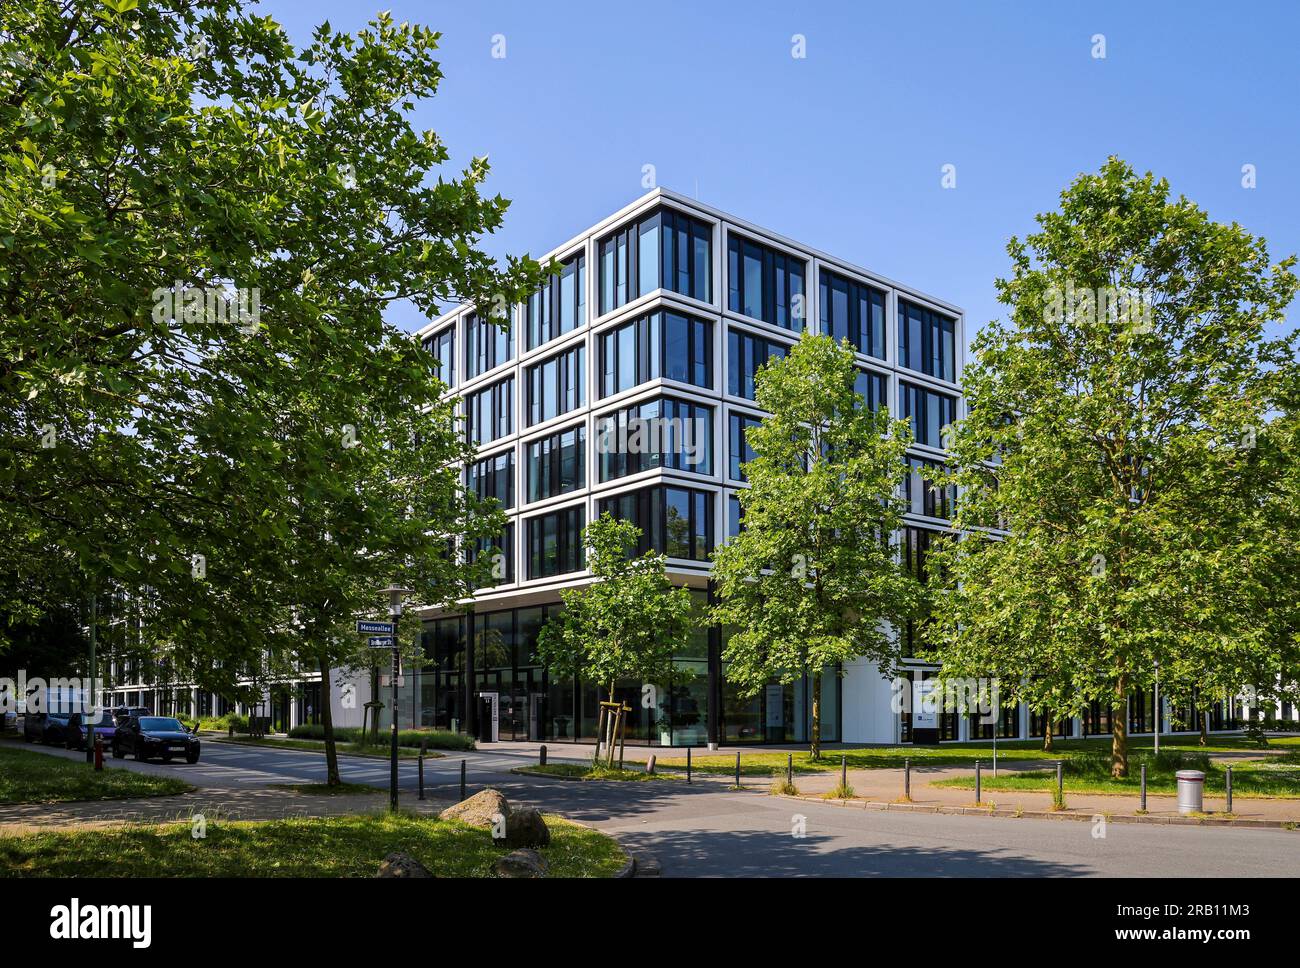 Essen, North Rhine-Westphalia, Germany - Brenntag, Brenntag headquarters, the company is the world market leader in the distribution of chemicals and ingredients Stock Photo